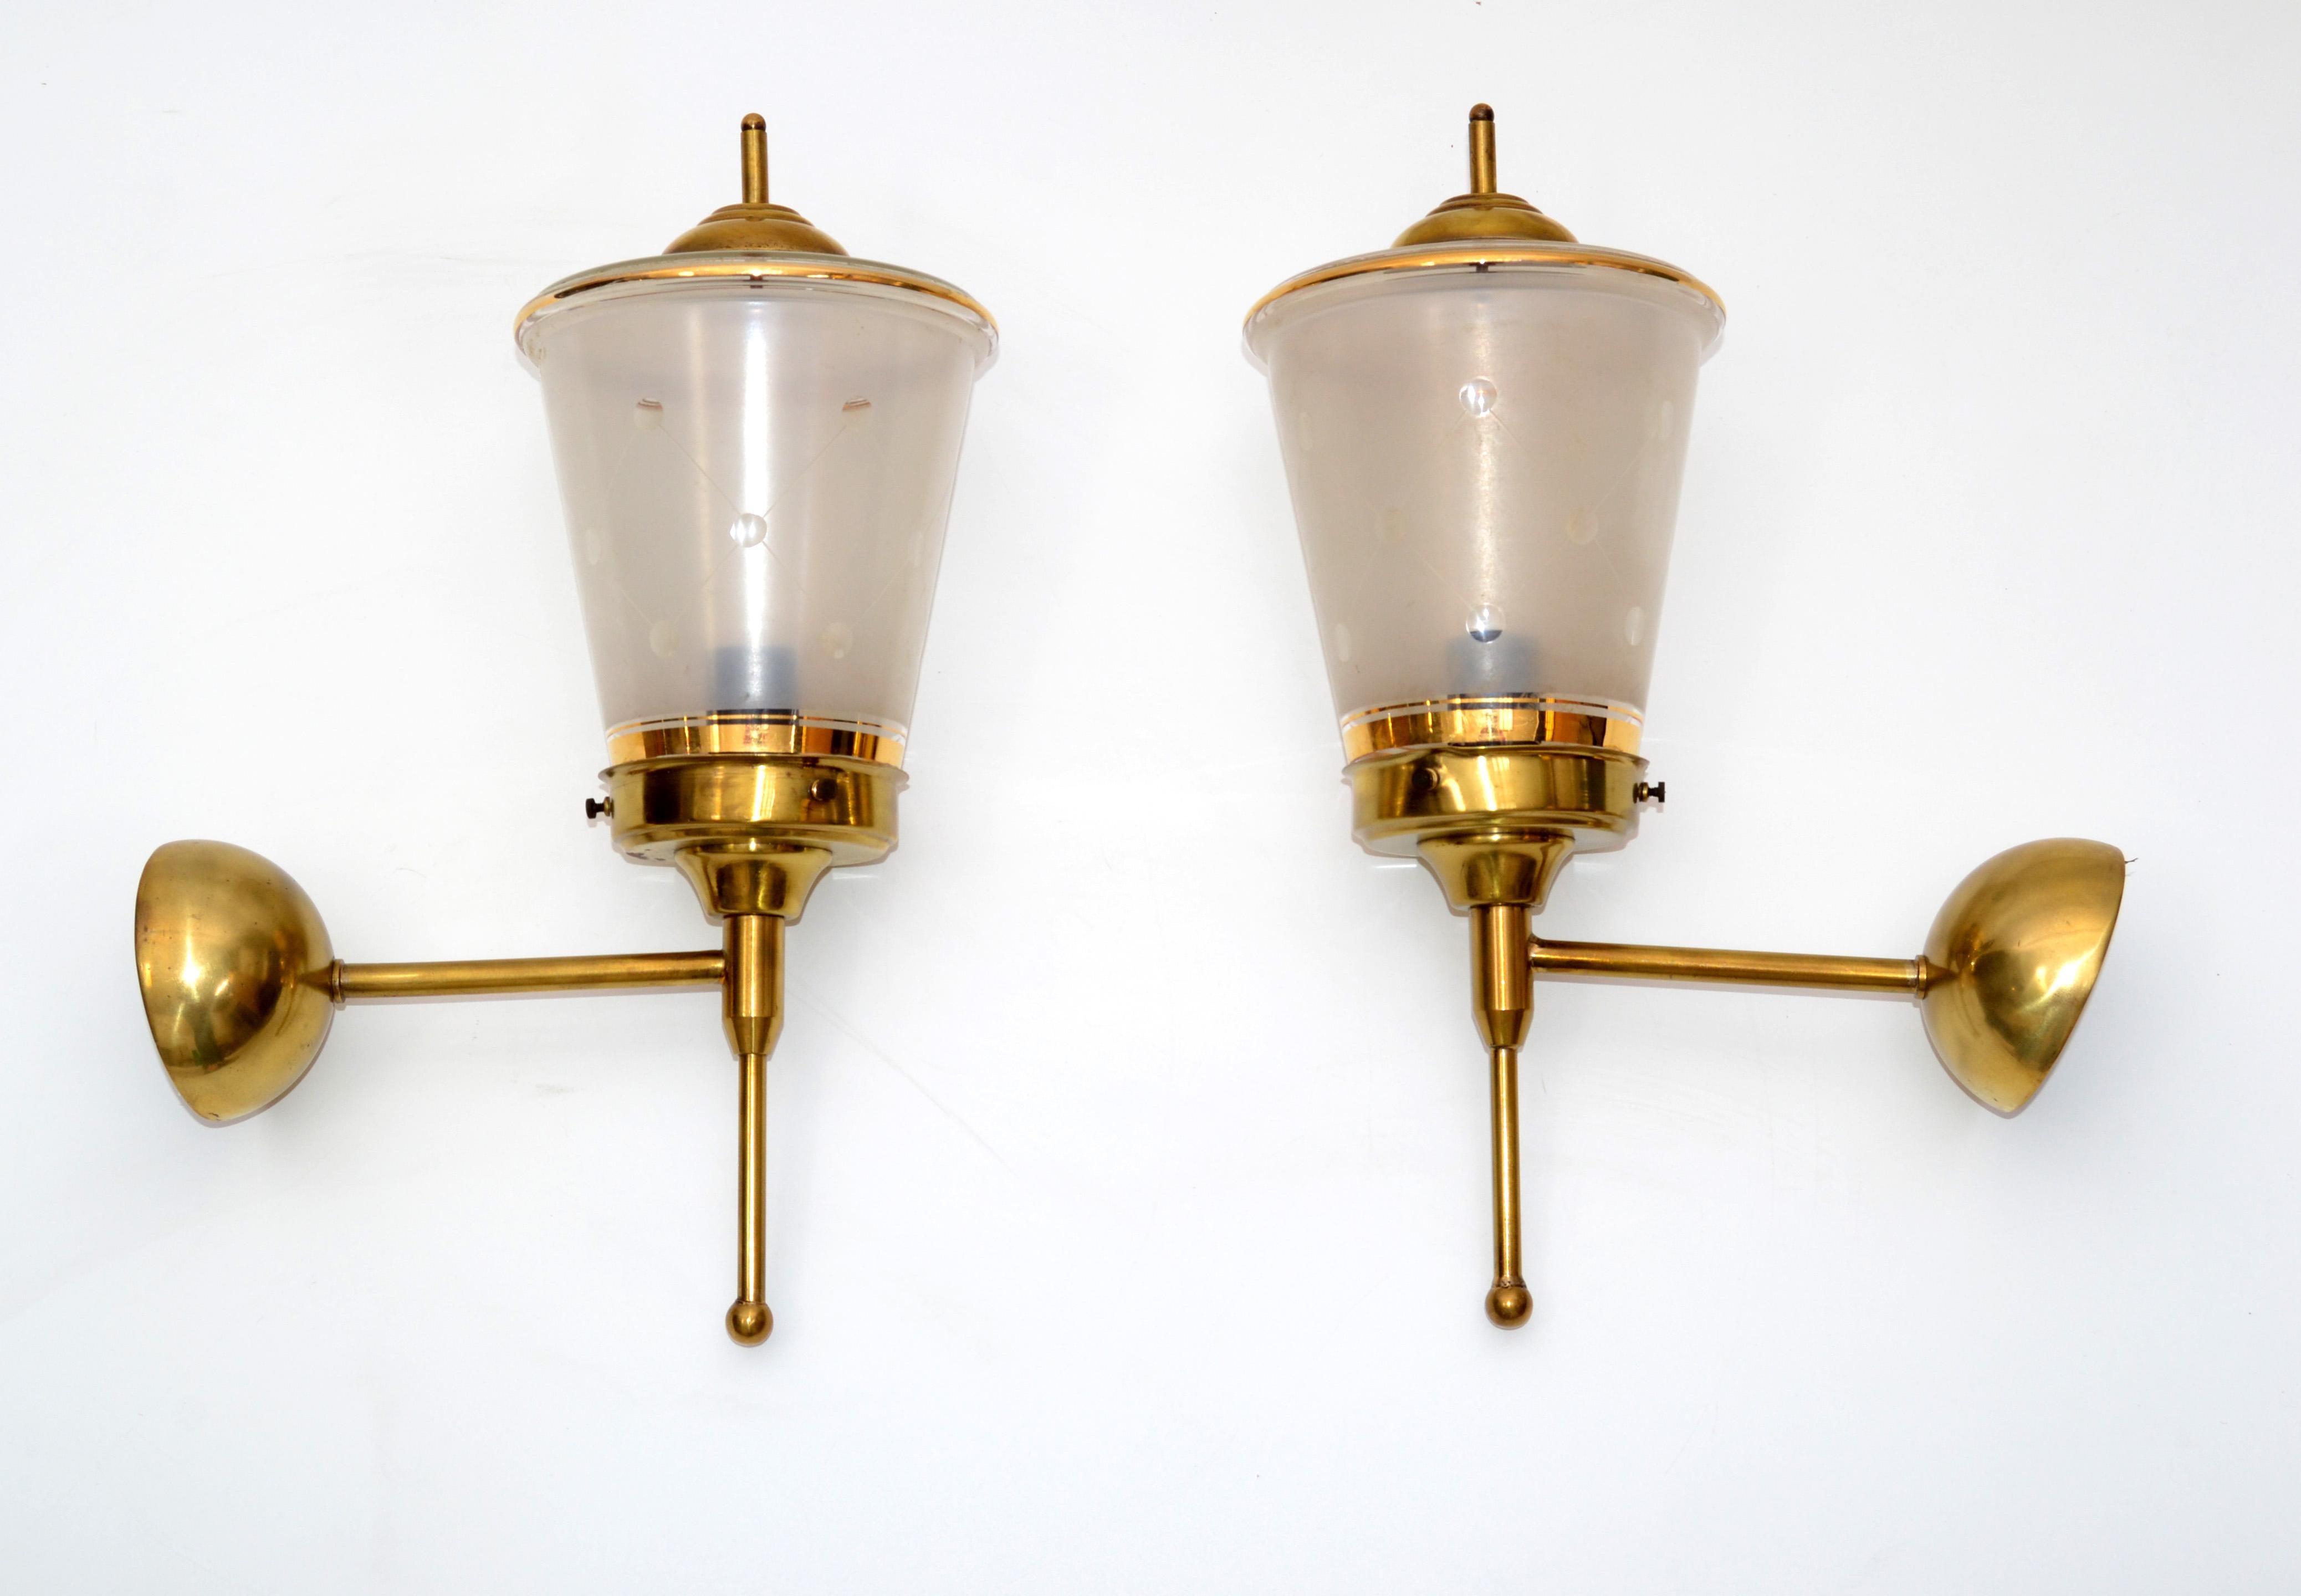 French Mid-Century Modern Maison Lunel pair of engraved glass and brass lantern wall-mounted sconce.
Each takes one light bulb with max. 40 watts.
Back plate measures 3.25 inches diameter.